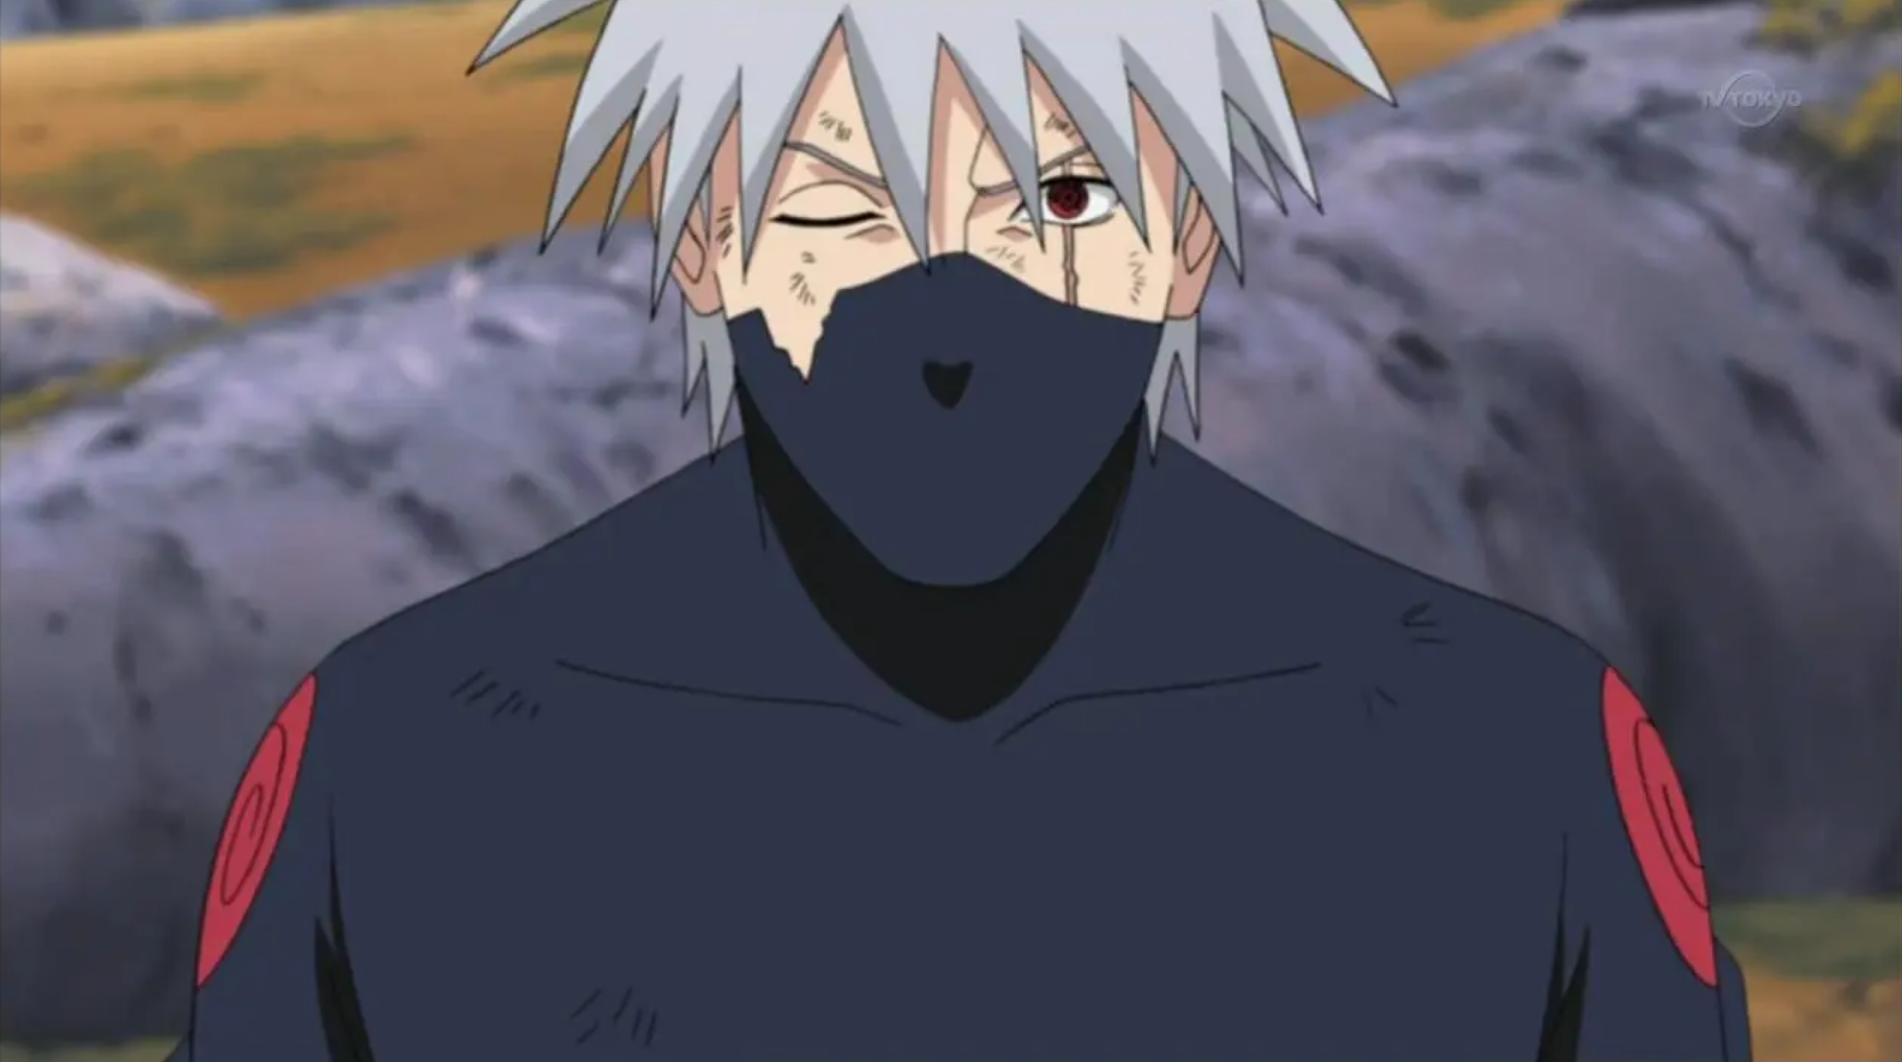 Does Kakashi ever show his face in Naruto? - Quora